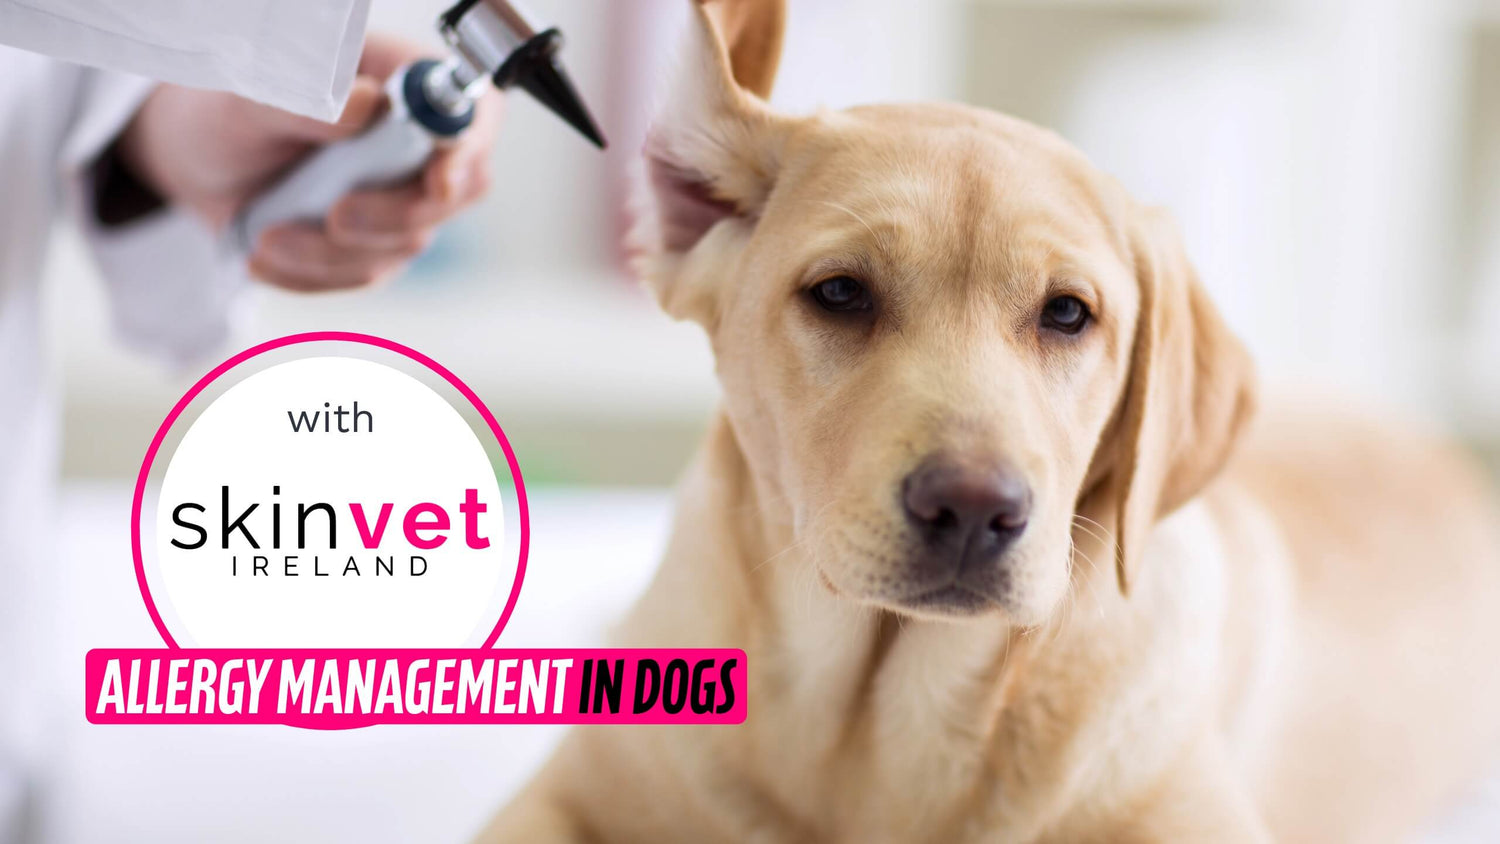 A Vet is looking into an ear of a dog using a medical instrument and a box with text “Allergy Management in Dogs”